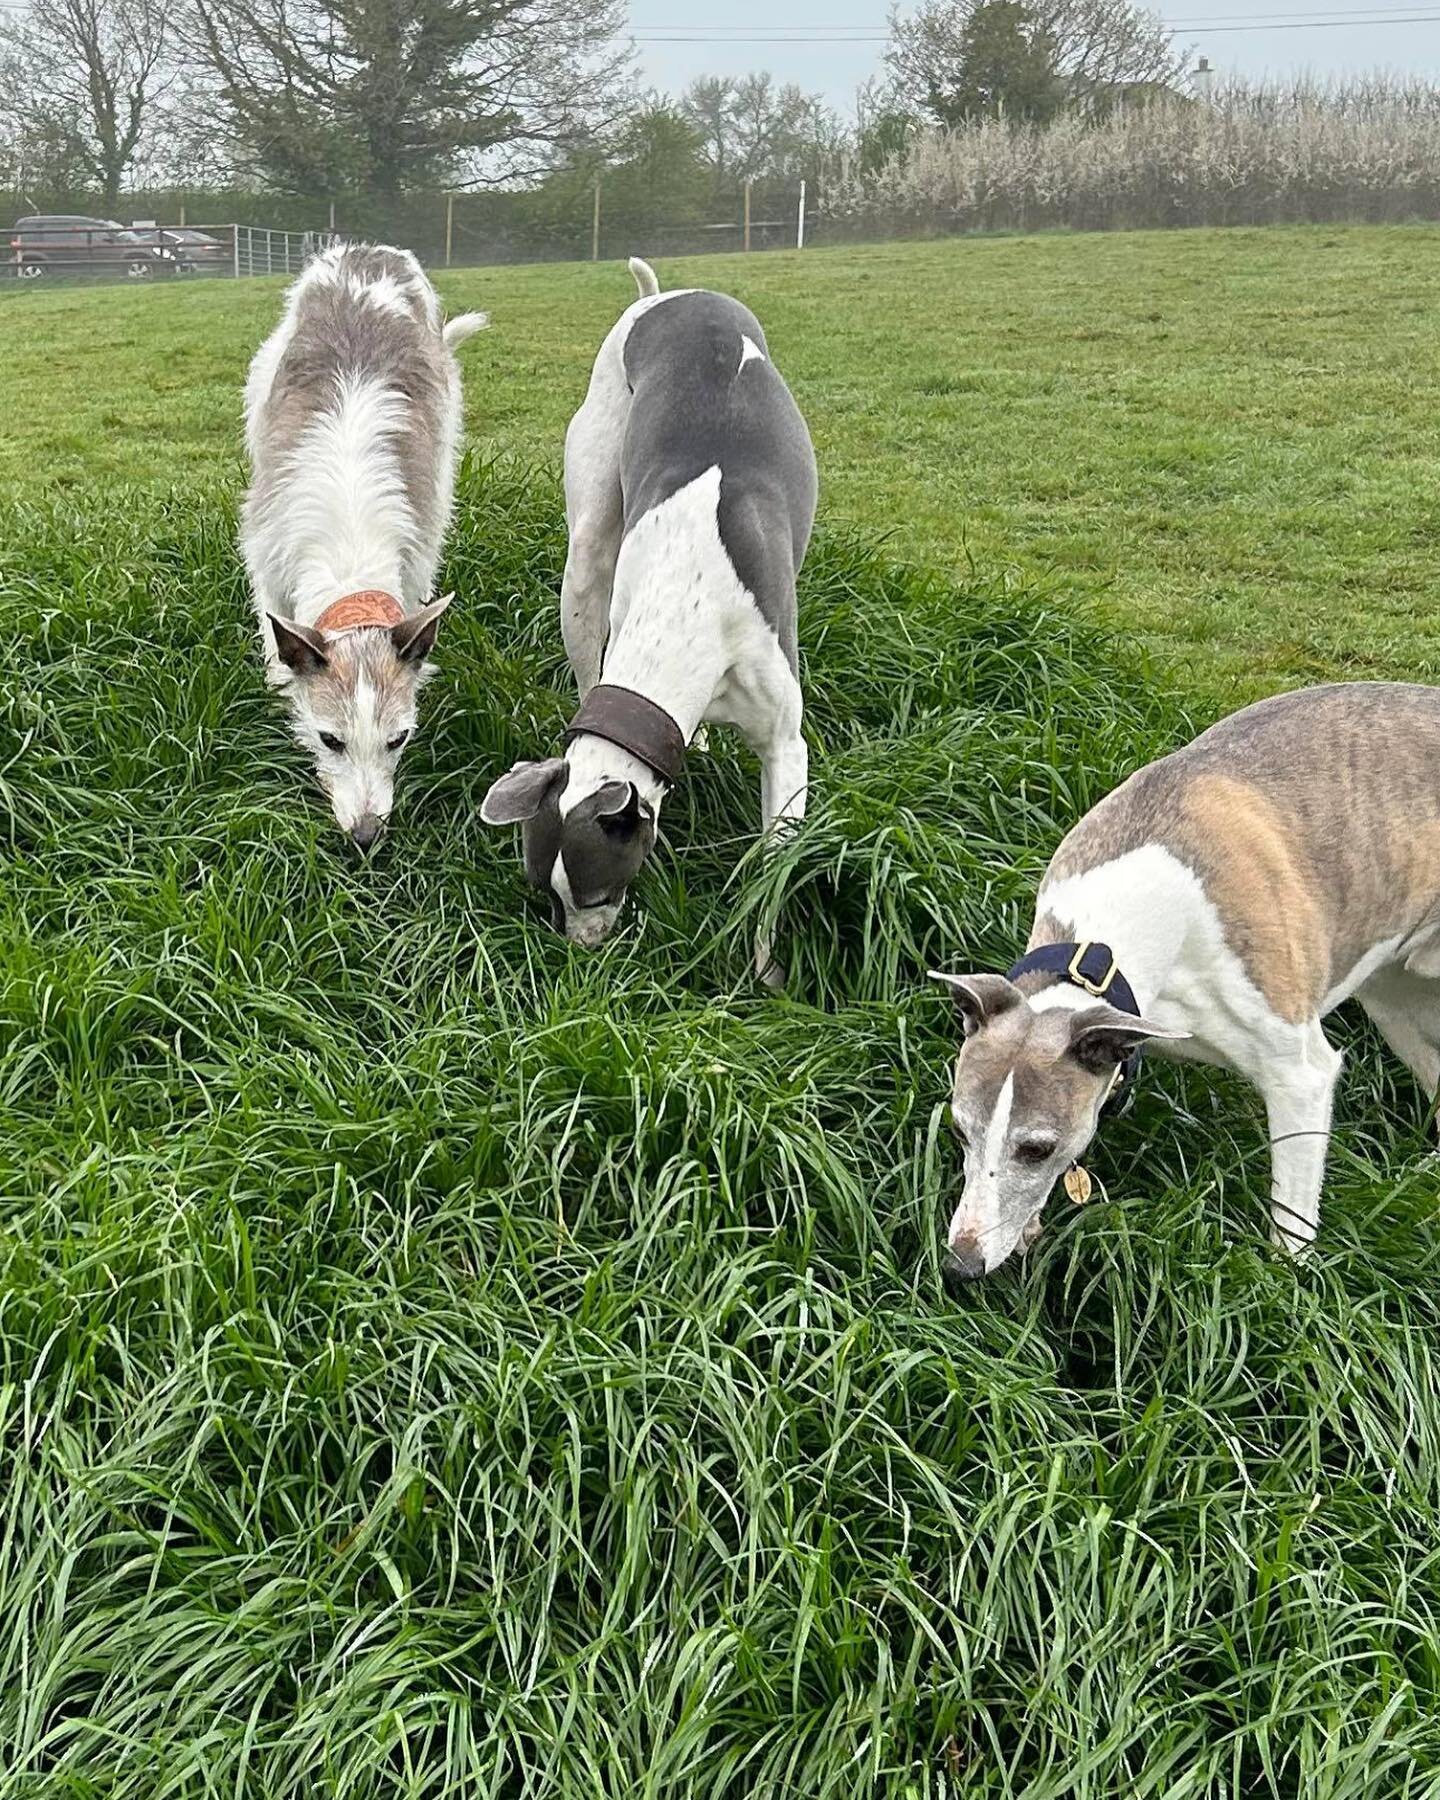 Bluey, Dan &amp; Walter had lots of Foggy Fun @ the Meadow yesterday!!!
Freedom they don&rsquo;t usually have. A 5 acres to frolic, forage, smell &amp; run!! 
🐾🐾🐾🐾